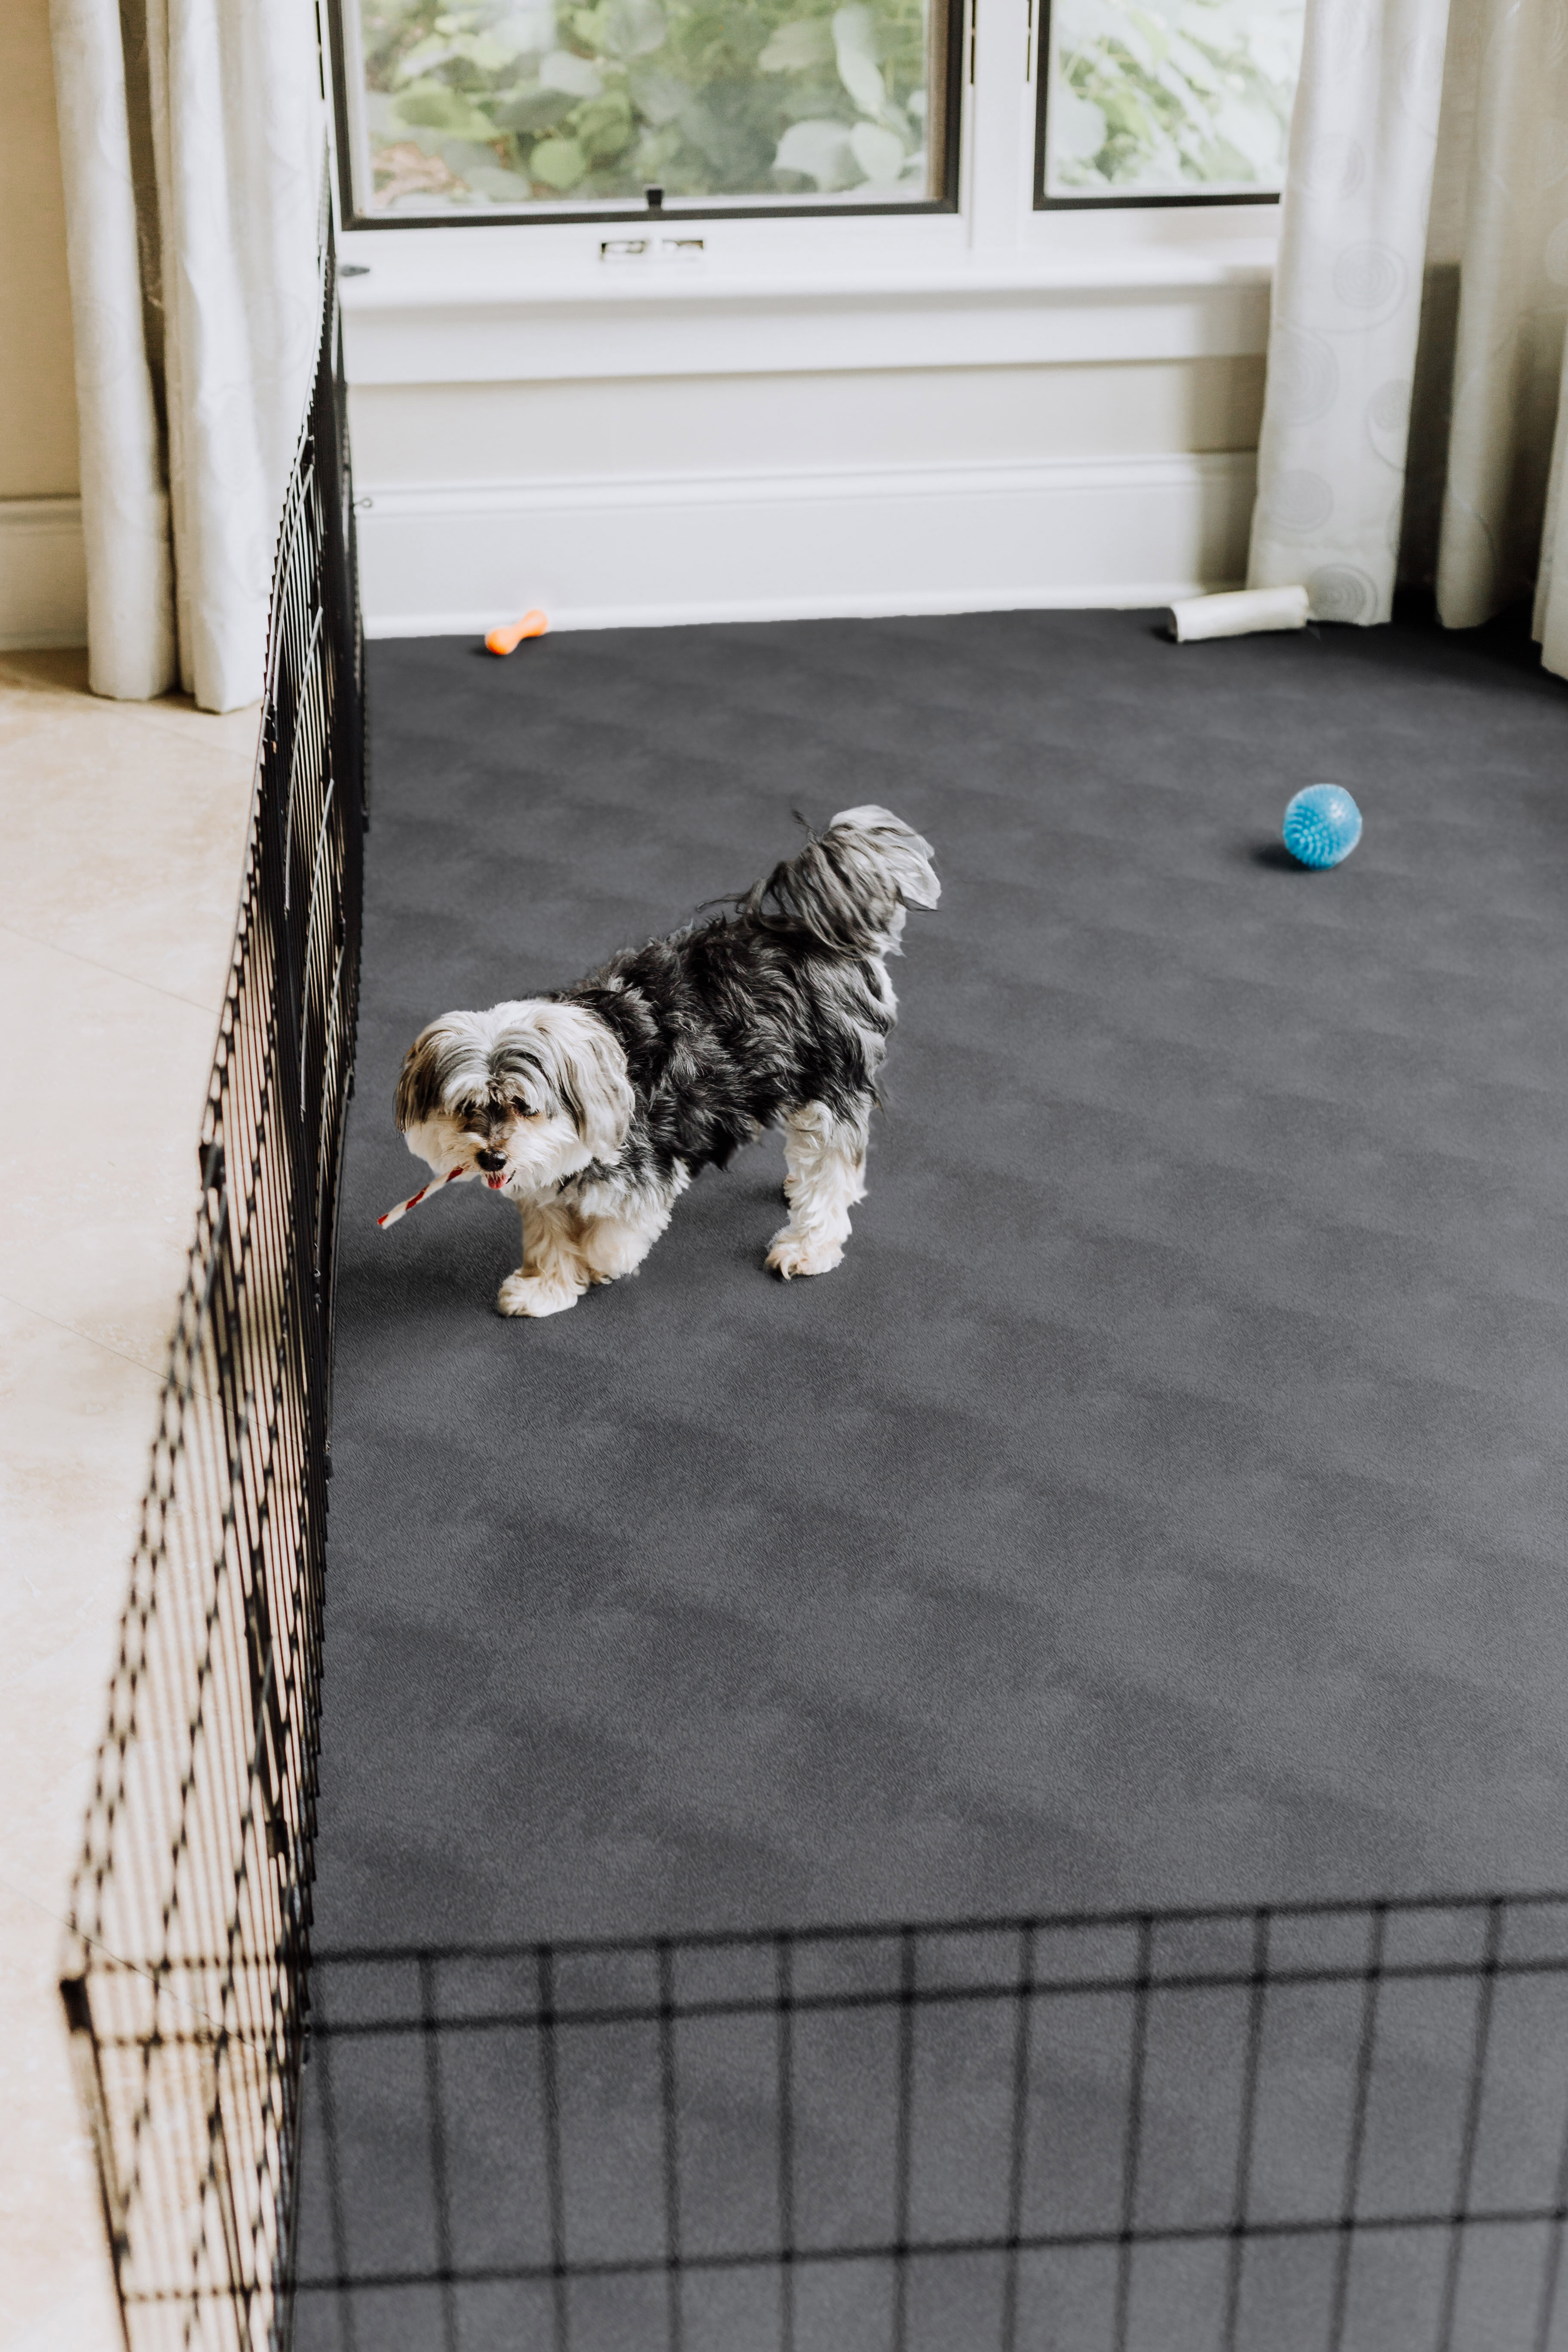 Protect My Old Dog From Slipping On Hardwood Floors: Mat Options